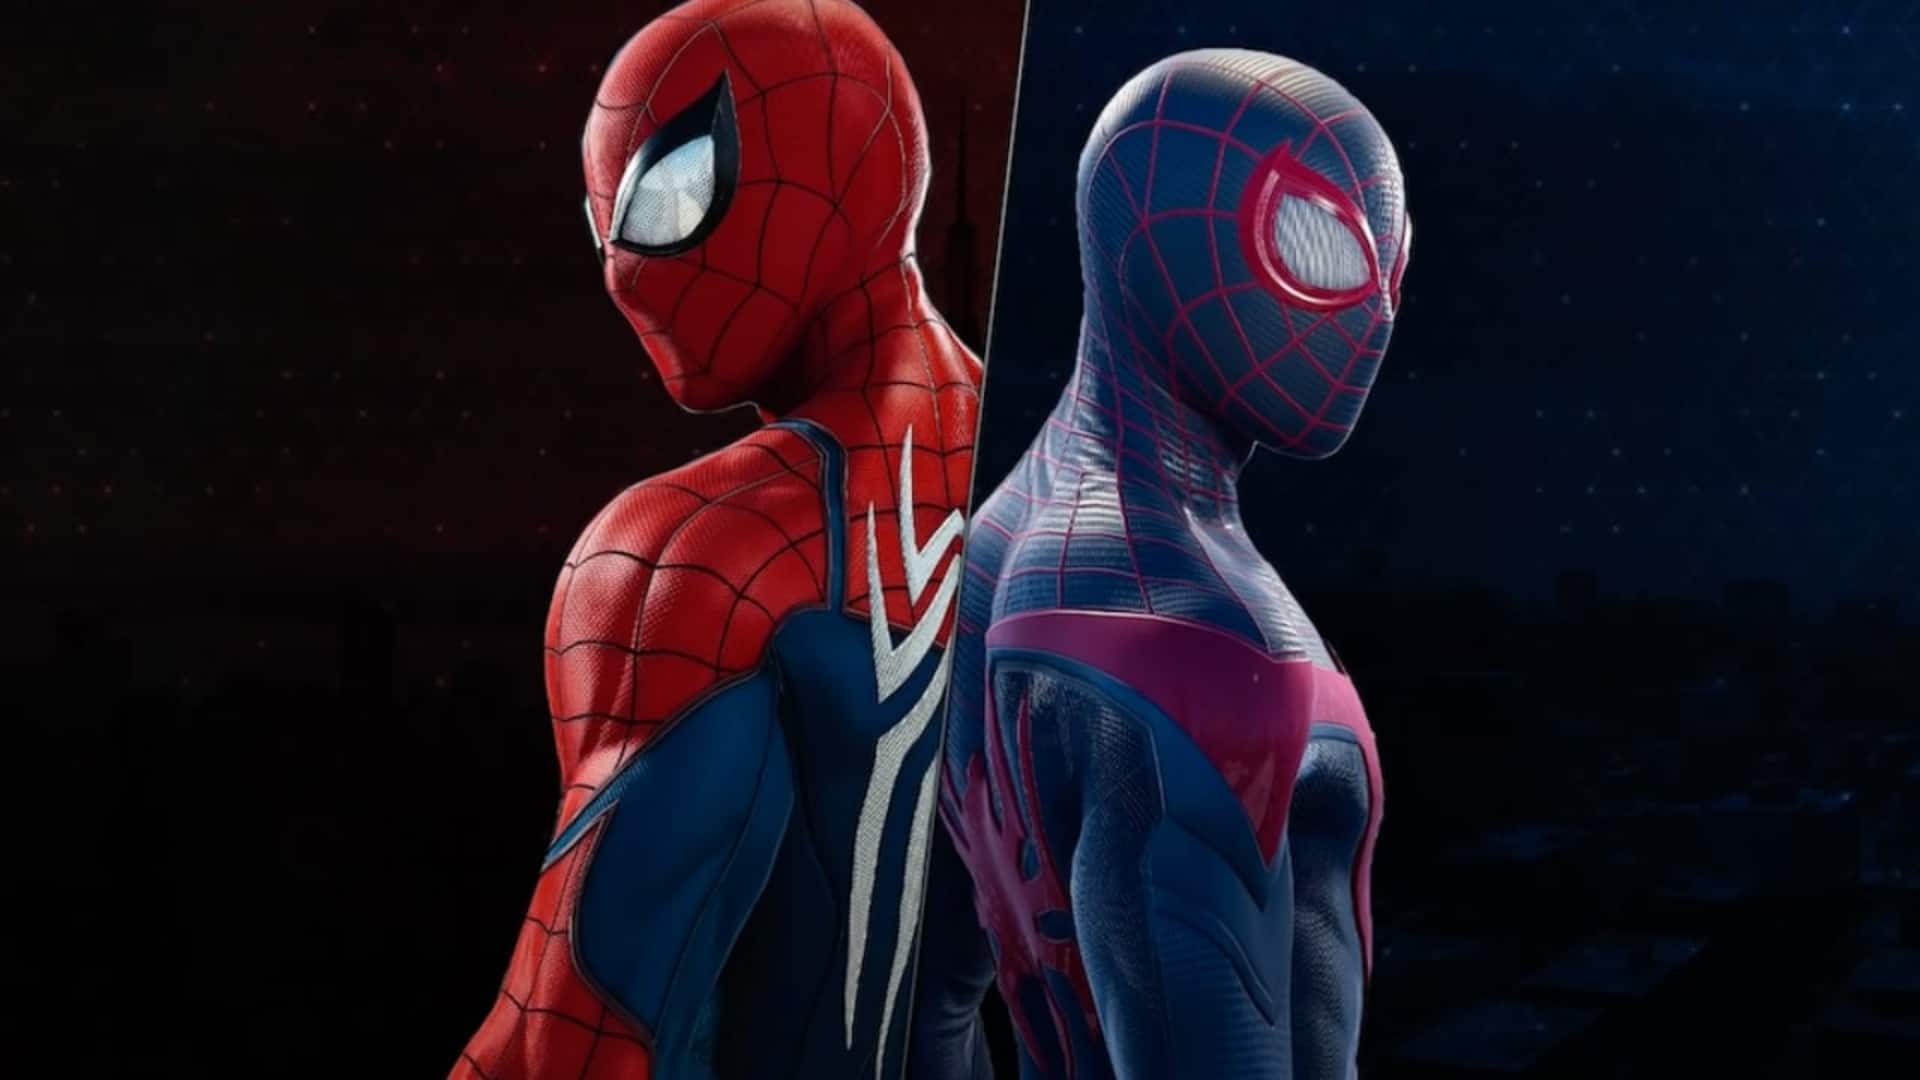 Marvels-Spider-Man-2-features-both-Peter-and-Miles-GamersRD (1)